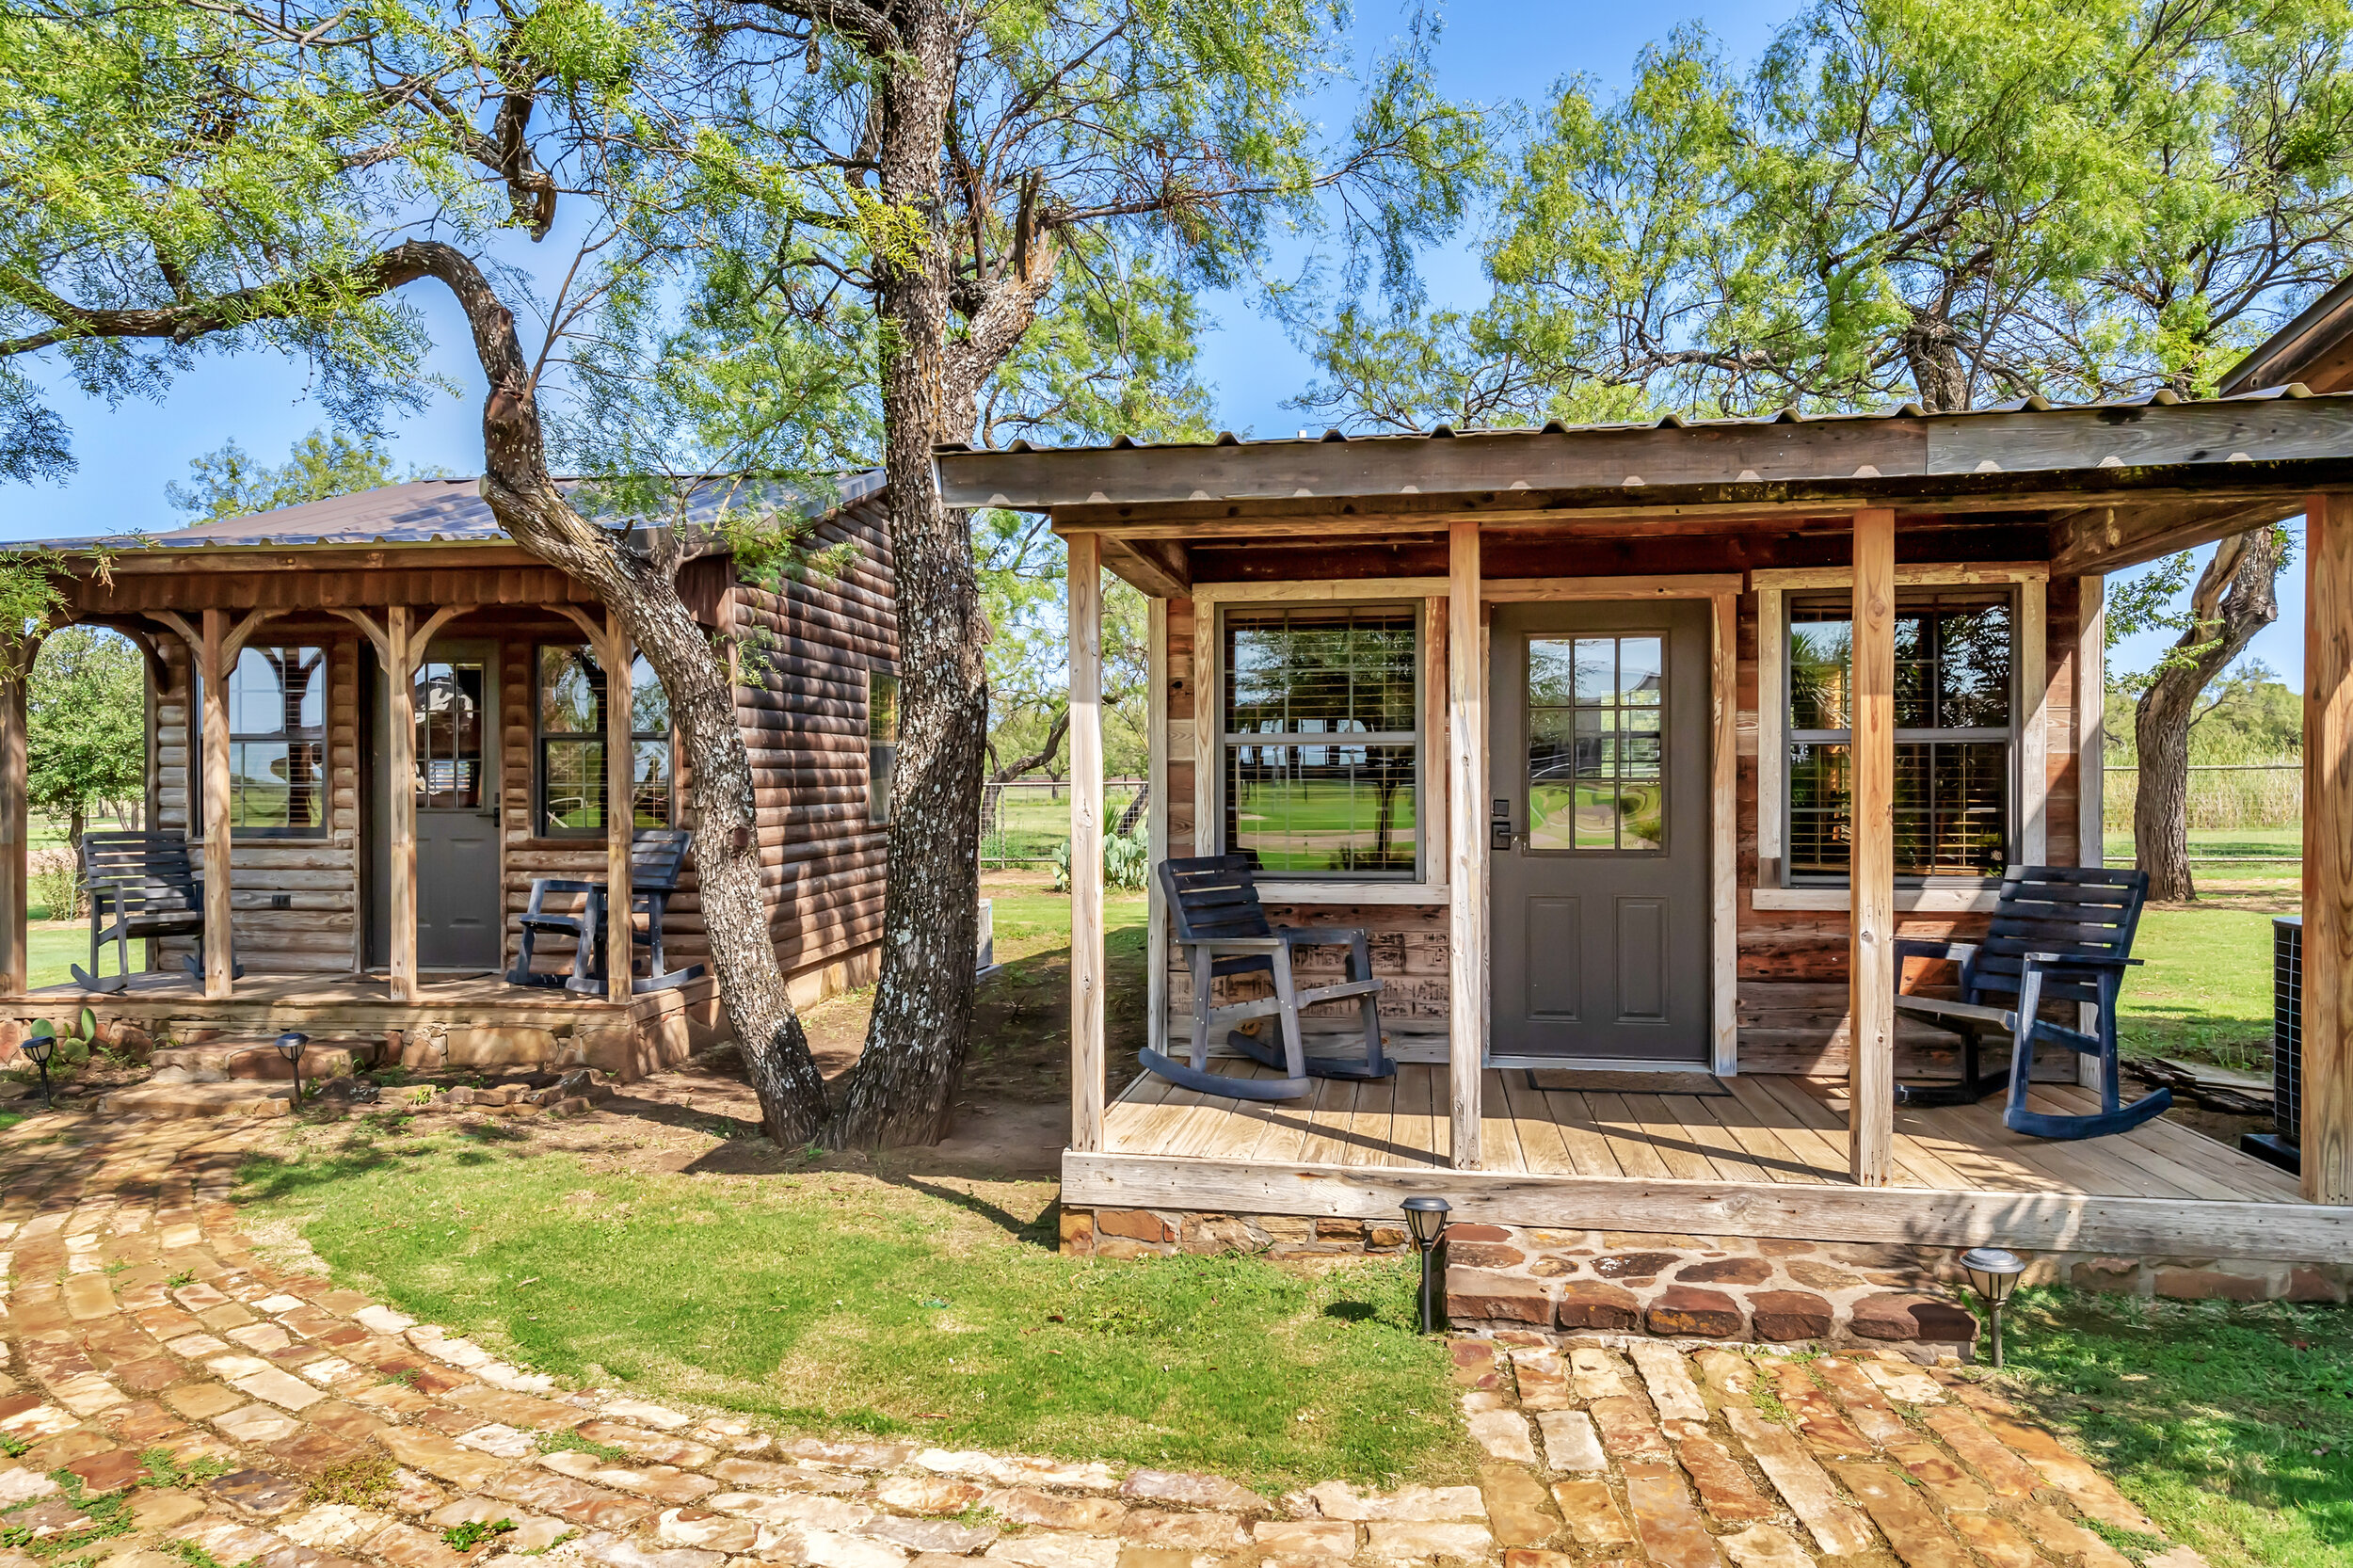 Cabin | Rocker B Ranch | Texas Event and Accommodation Venue